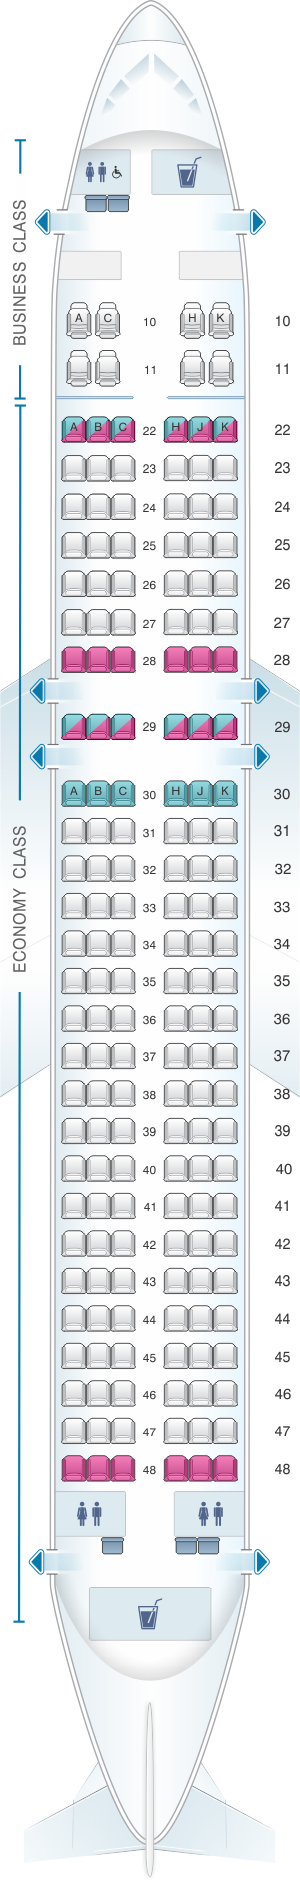 Seat map for Cathay Pacific Airways Cathay Dragon Airbus A320 200